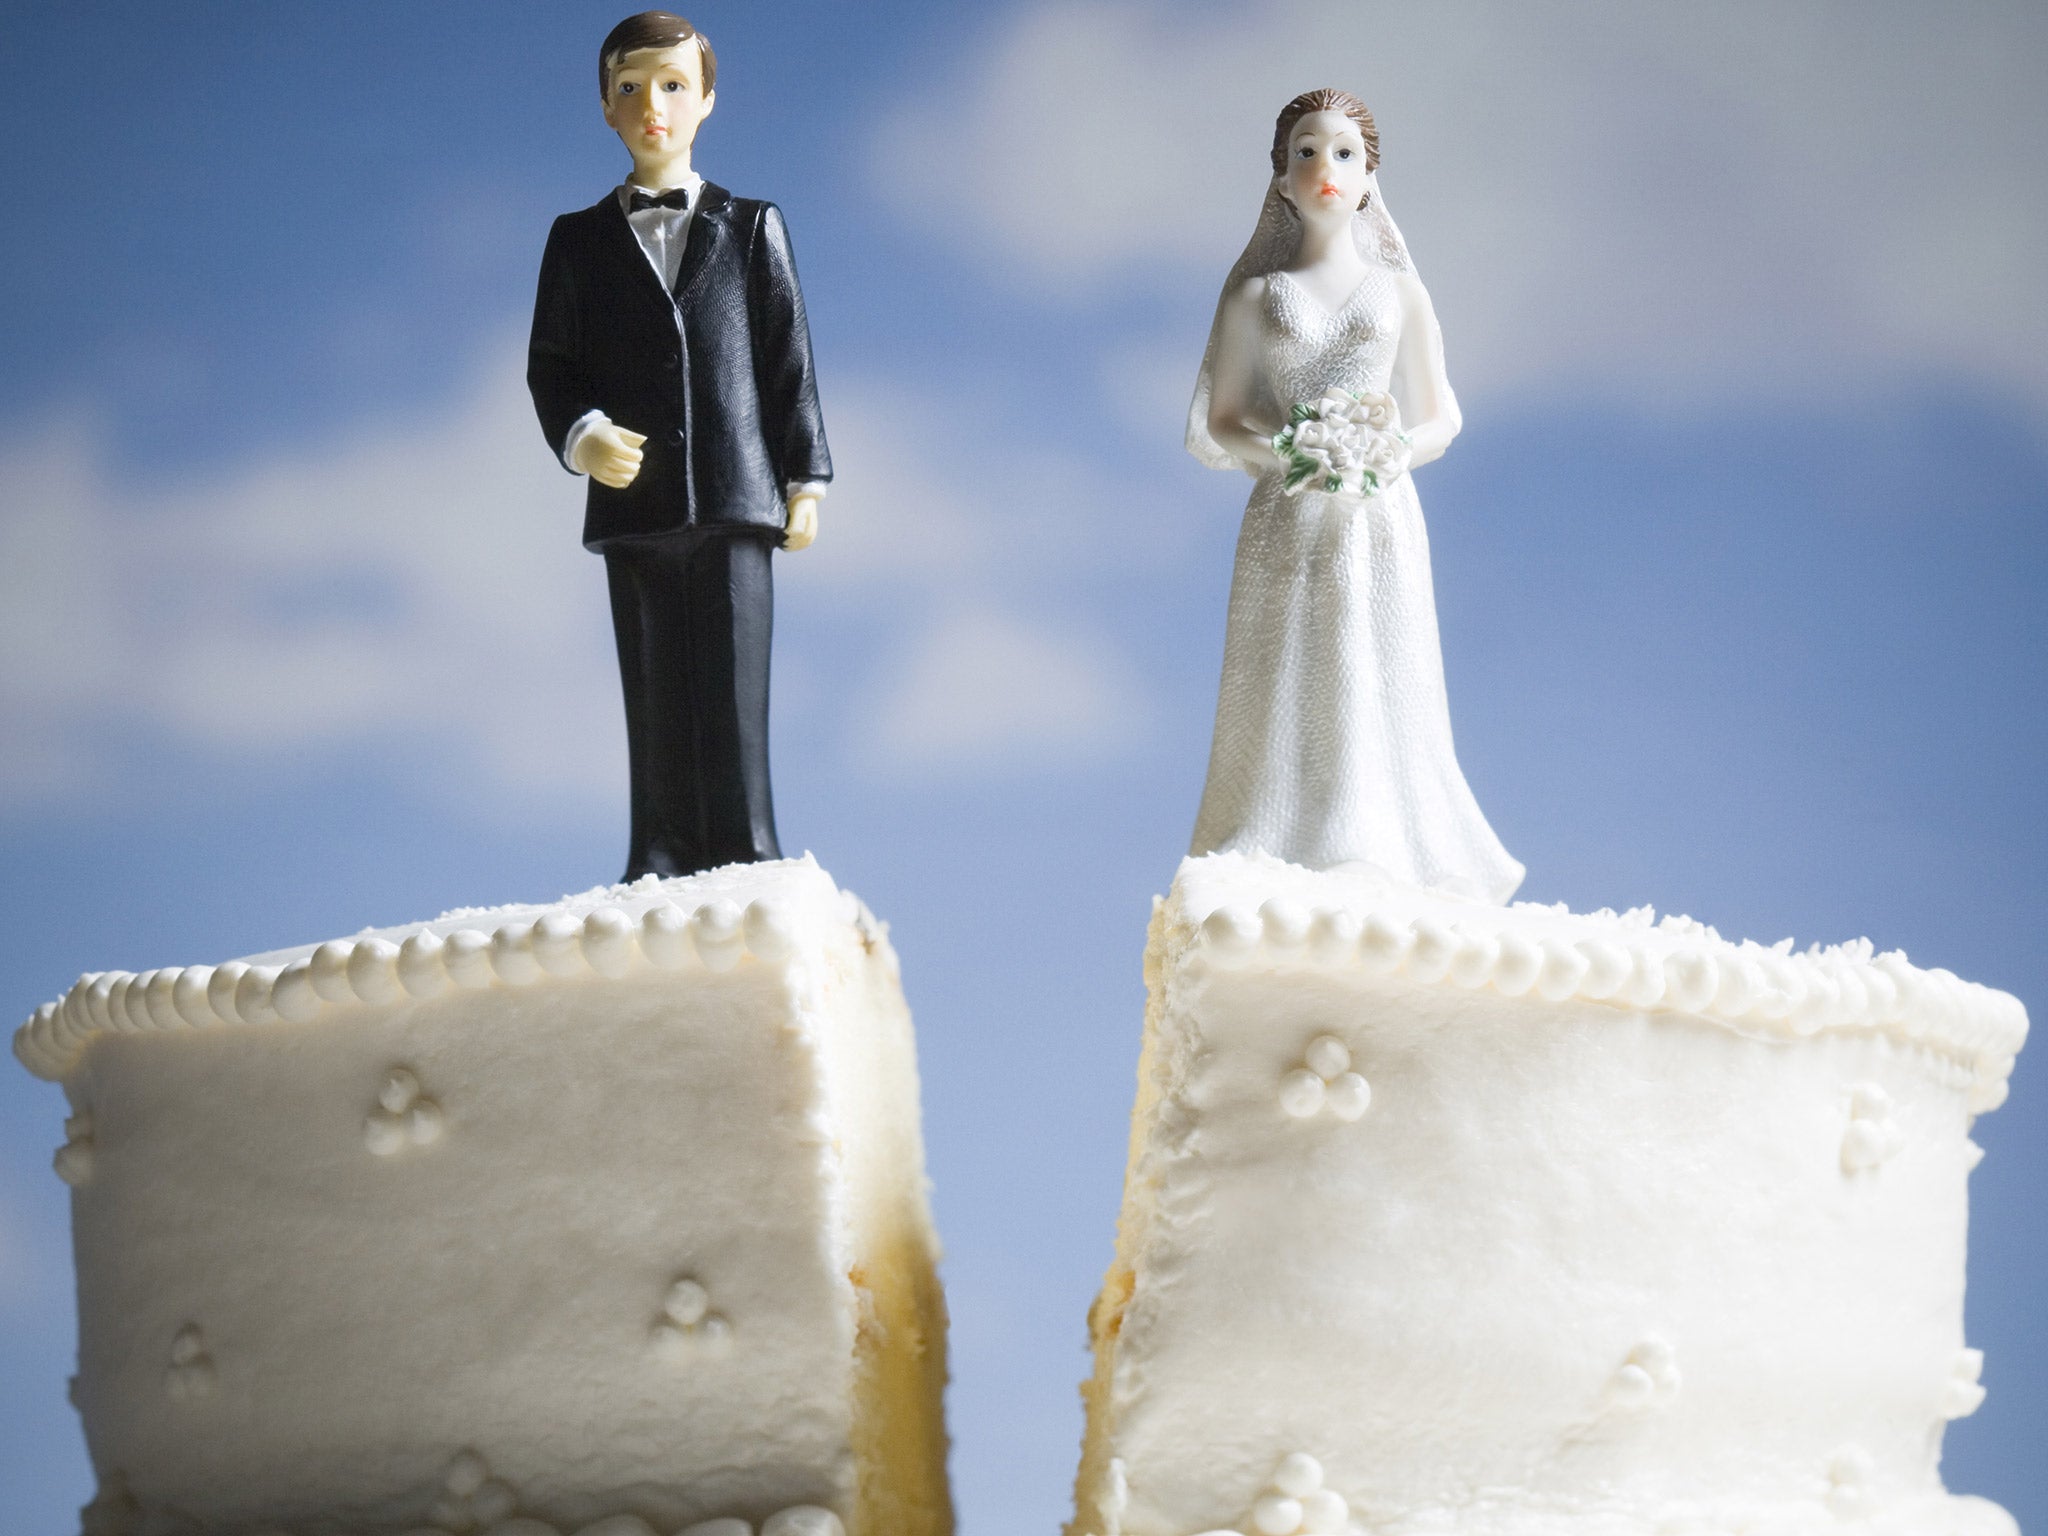 England has gained a reputation as divorce capital of the world